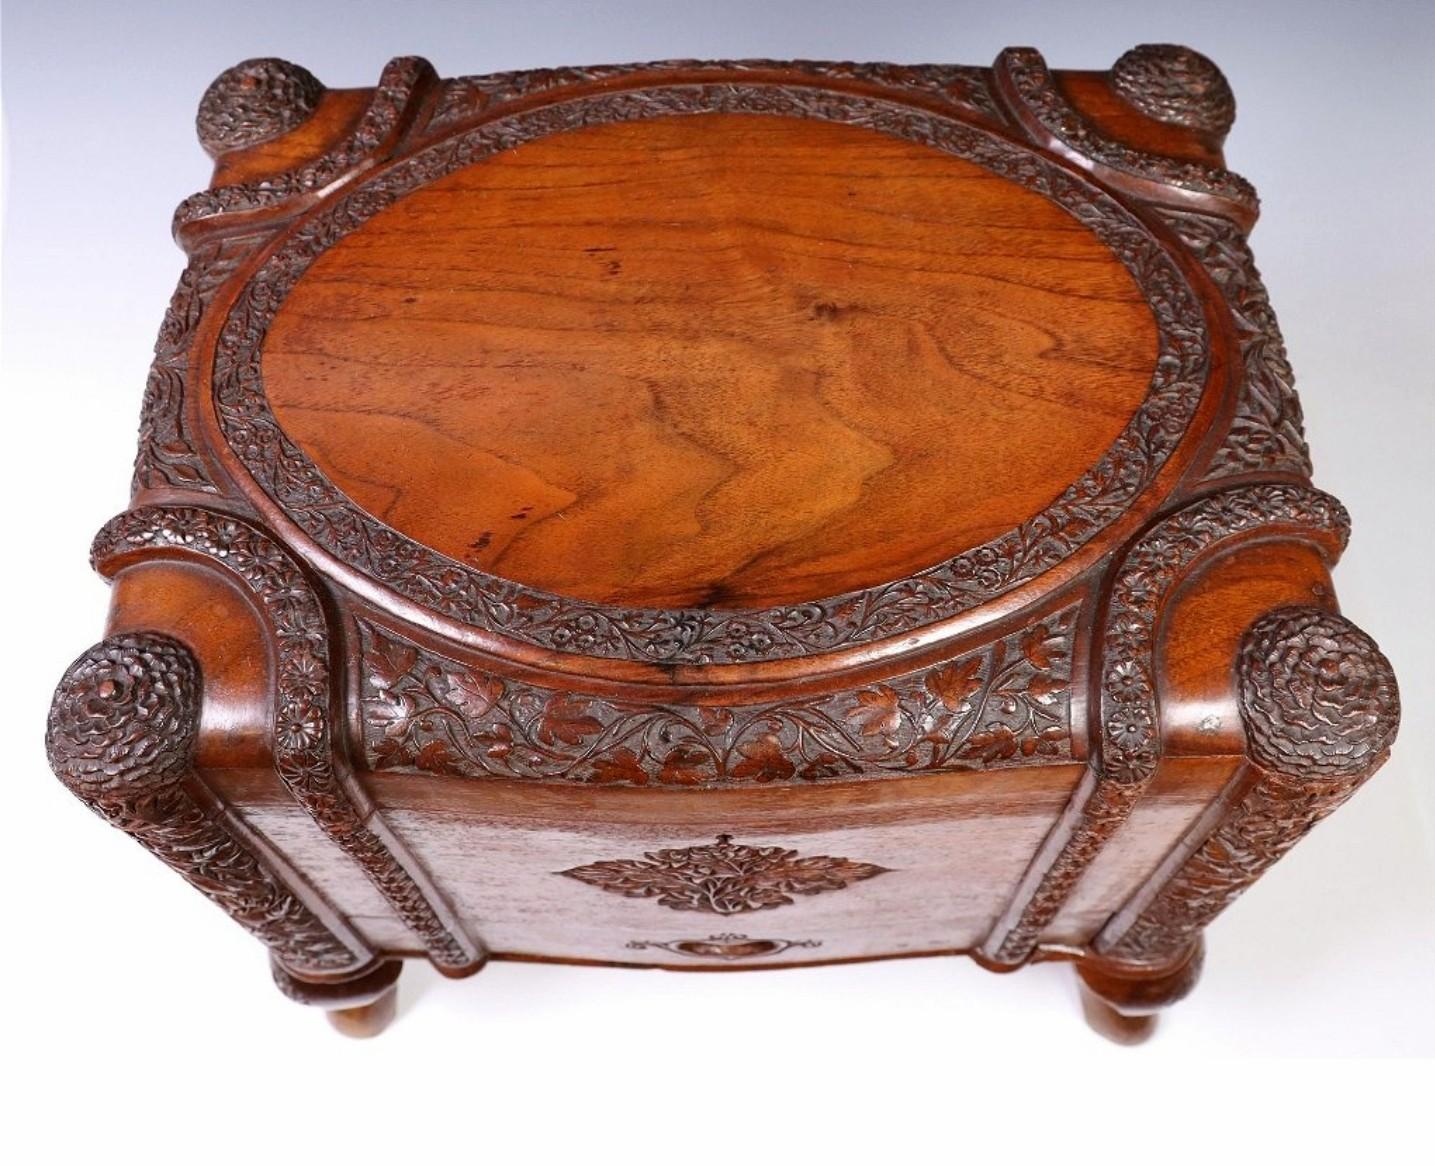 20th Century Antique South Asian Colonial Carved Camphor Wood Table Box / Jewelry Casket For Sale